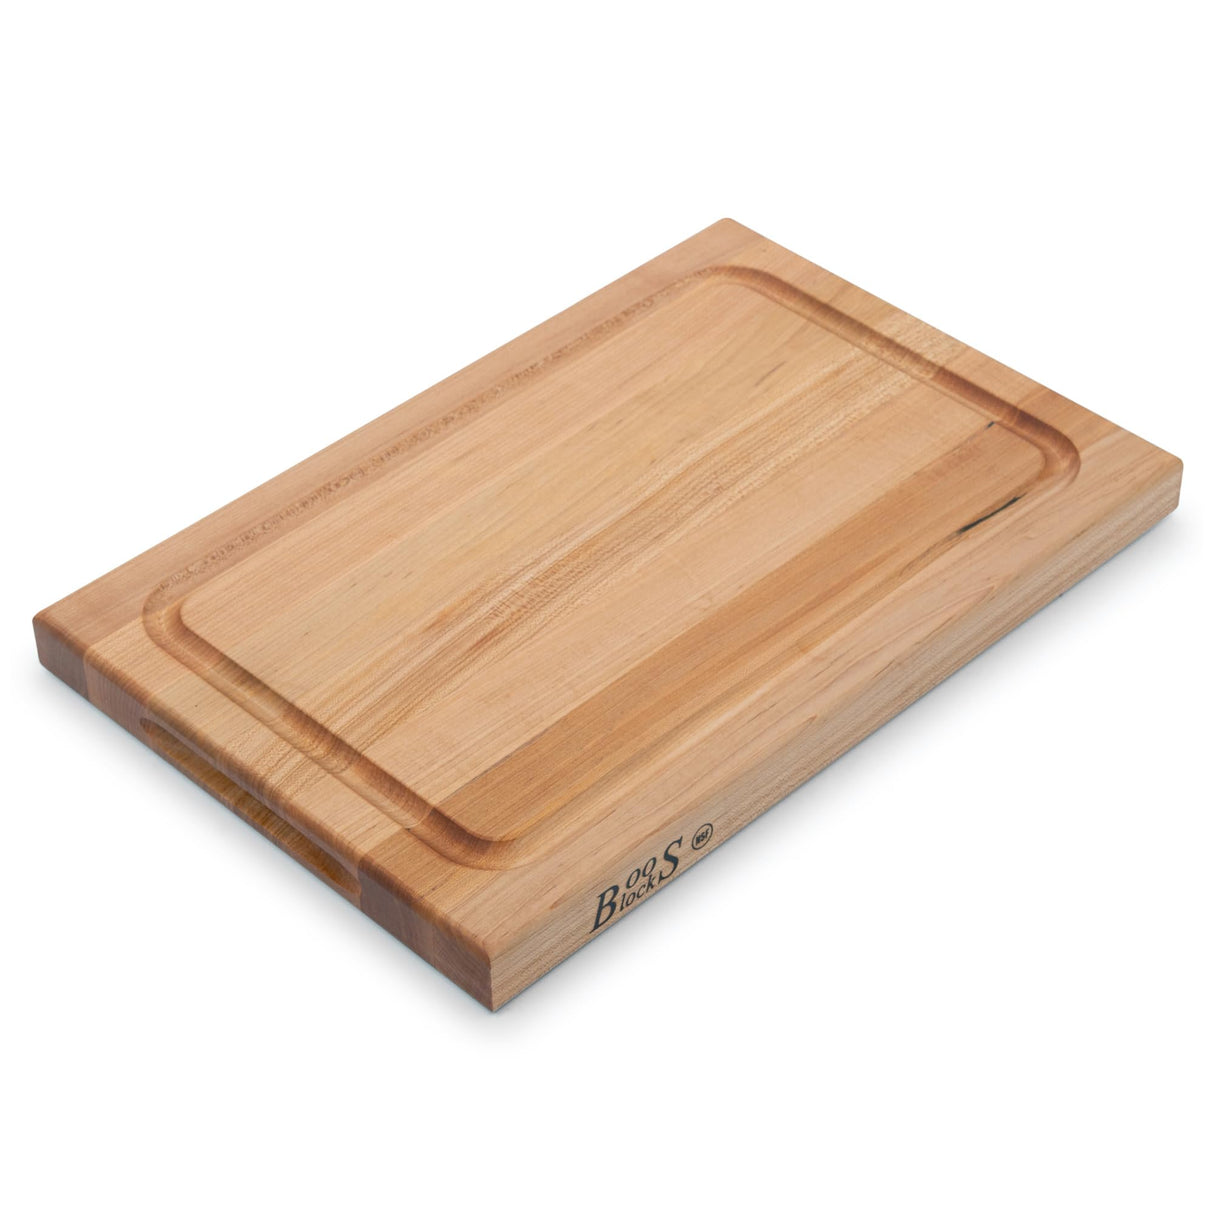 John Boos CB1054-1M2418150 Maple Wood Cutting Board for Kitchen Prep, 24 x 18 Inches, 1.5 Inches Thick Edge Grain Reversible Charcuterie Block with Juice Groove 24X18X1.5 MPL-EDGE GR-REV-